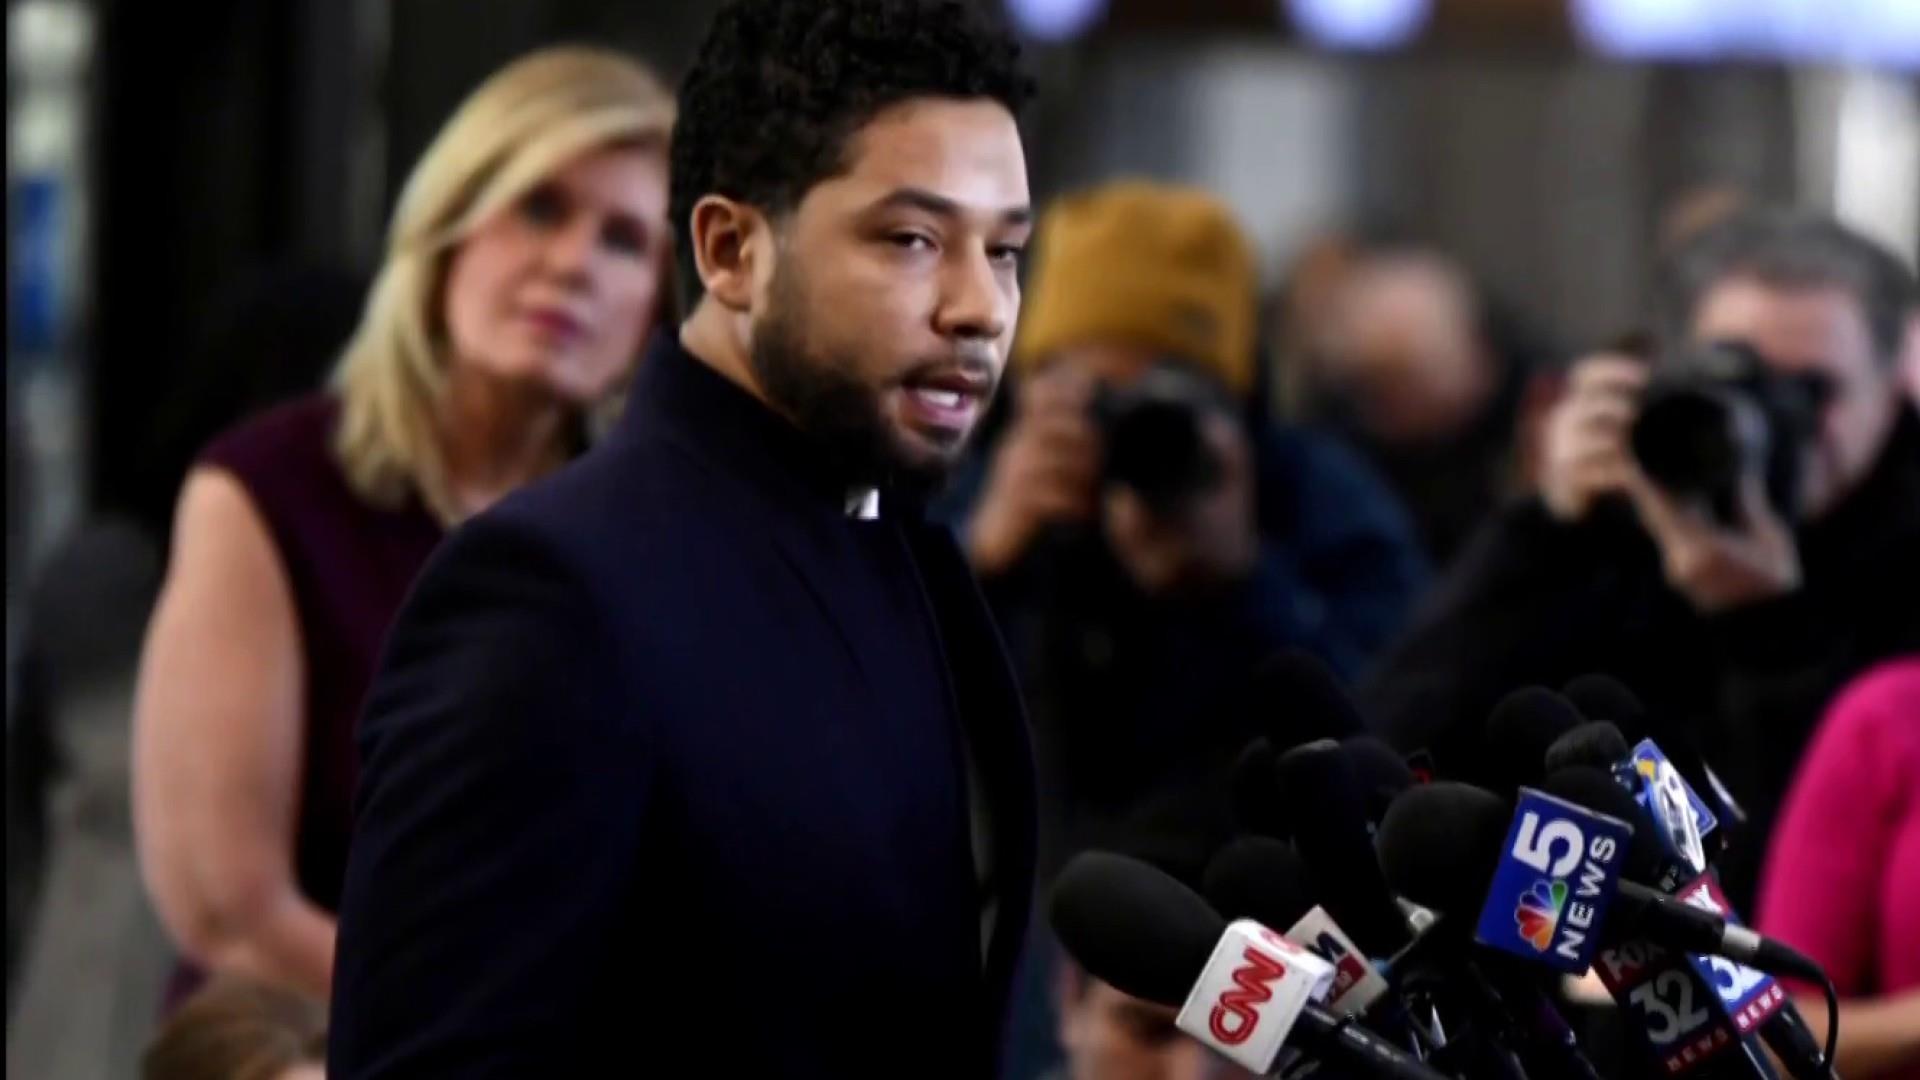 Nightly News on Flipboard by NBC News | Protest, Military, Jussie Smollett